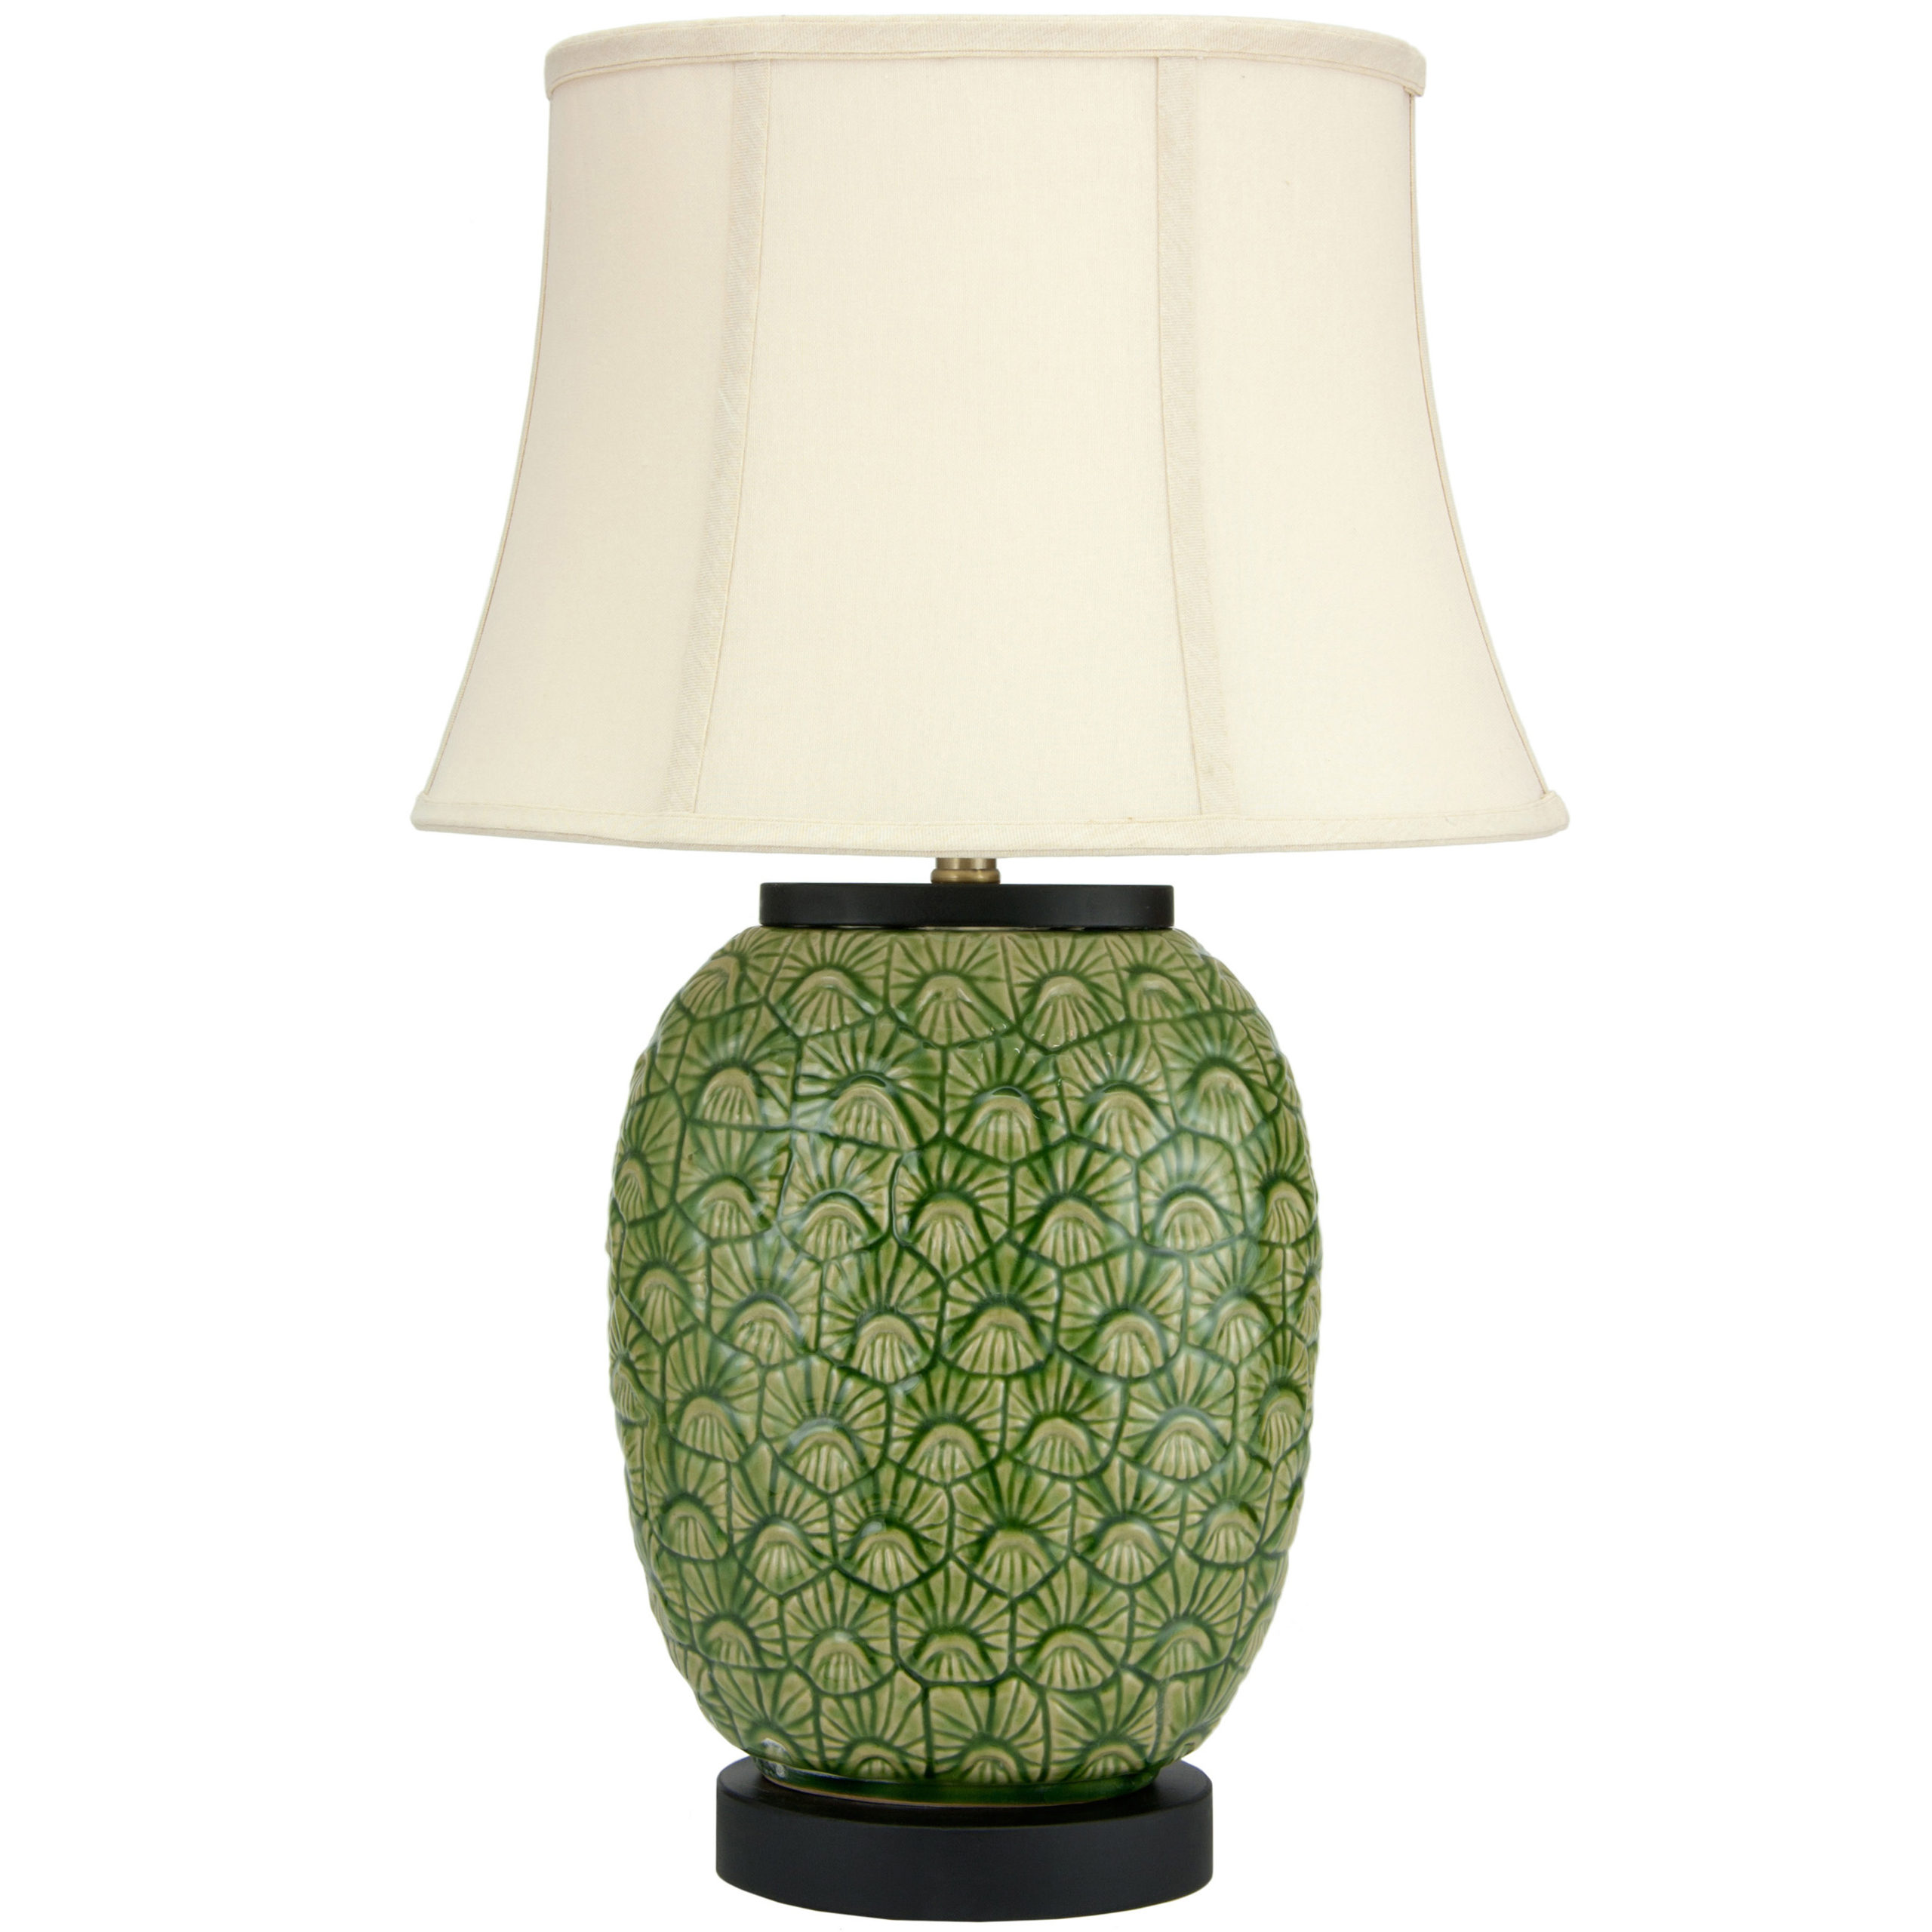 Feather Design  25.5" H Table Lamp with Bell Shade